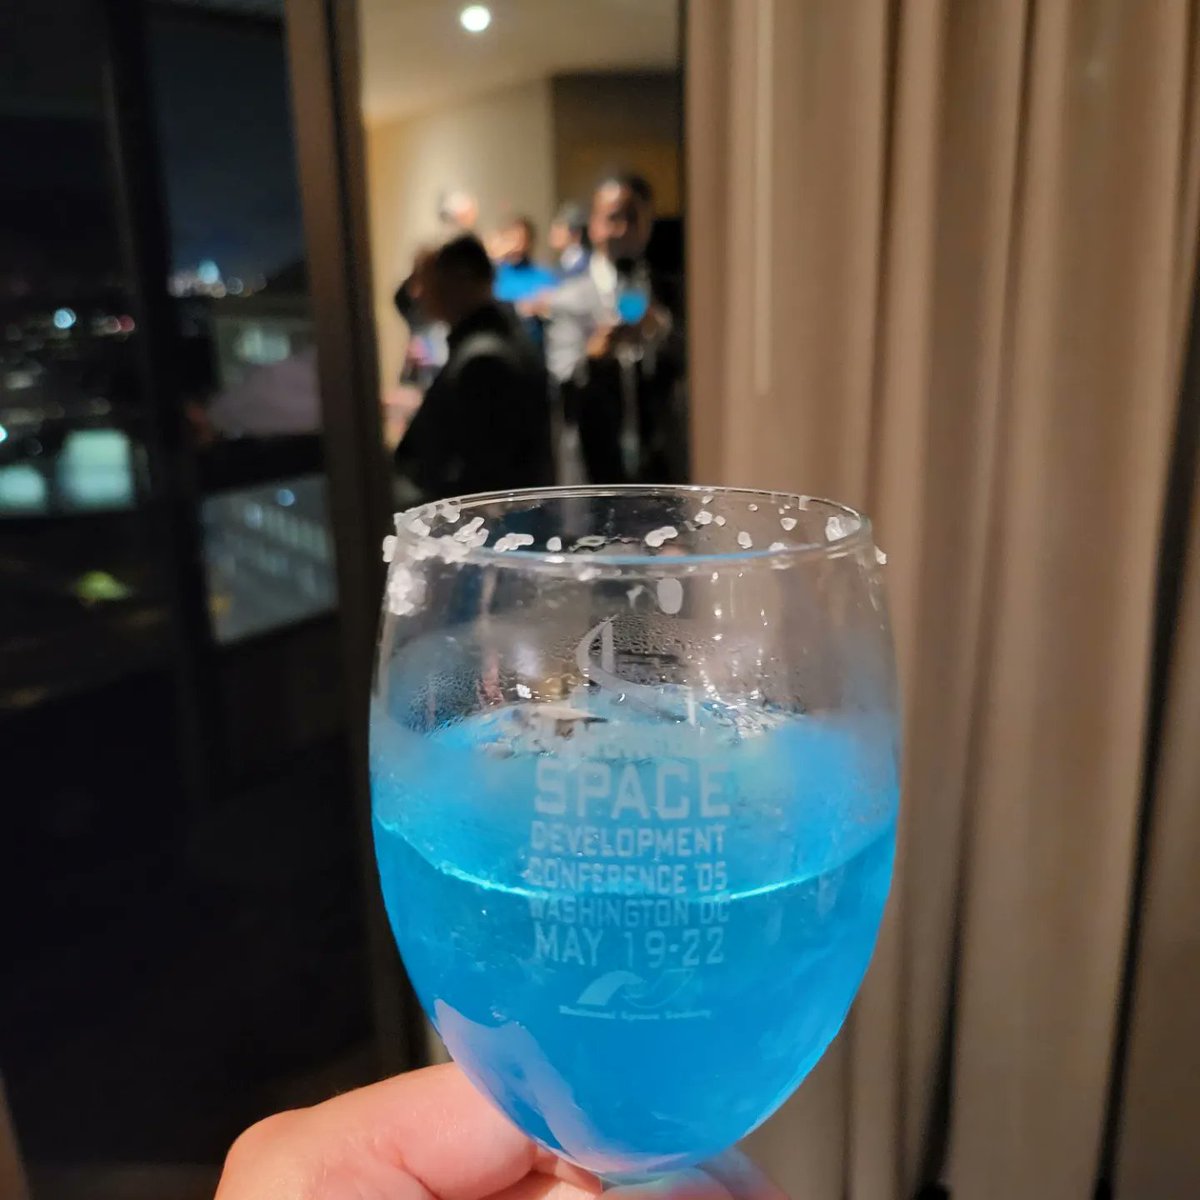 A toast to ISDC2022! #isdc2022 #newspace #nationalspacesociety